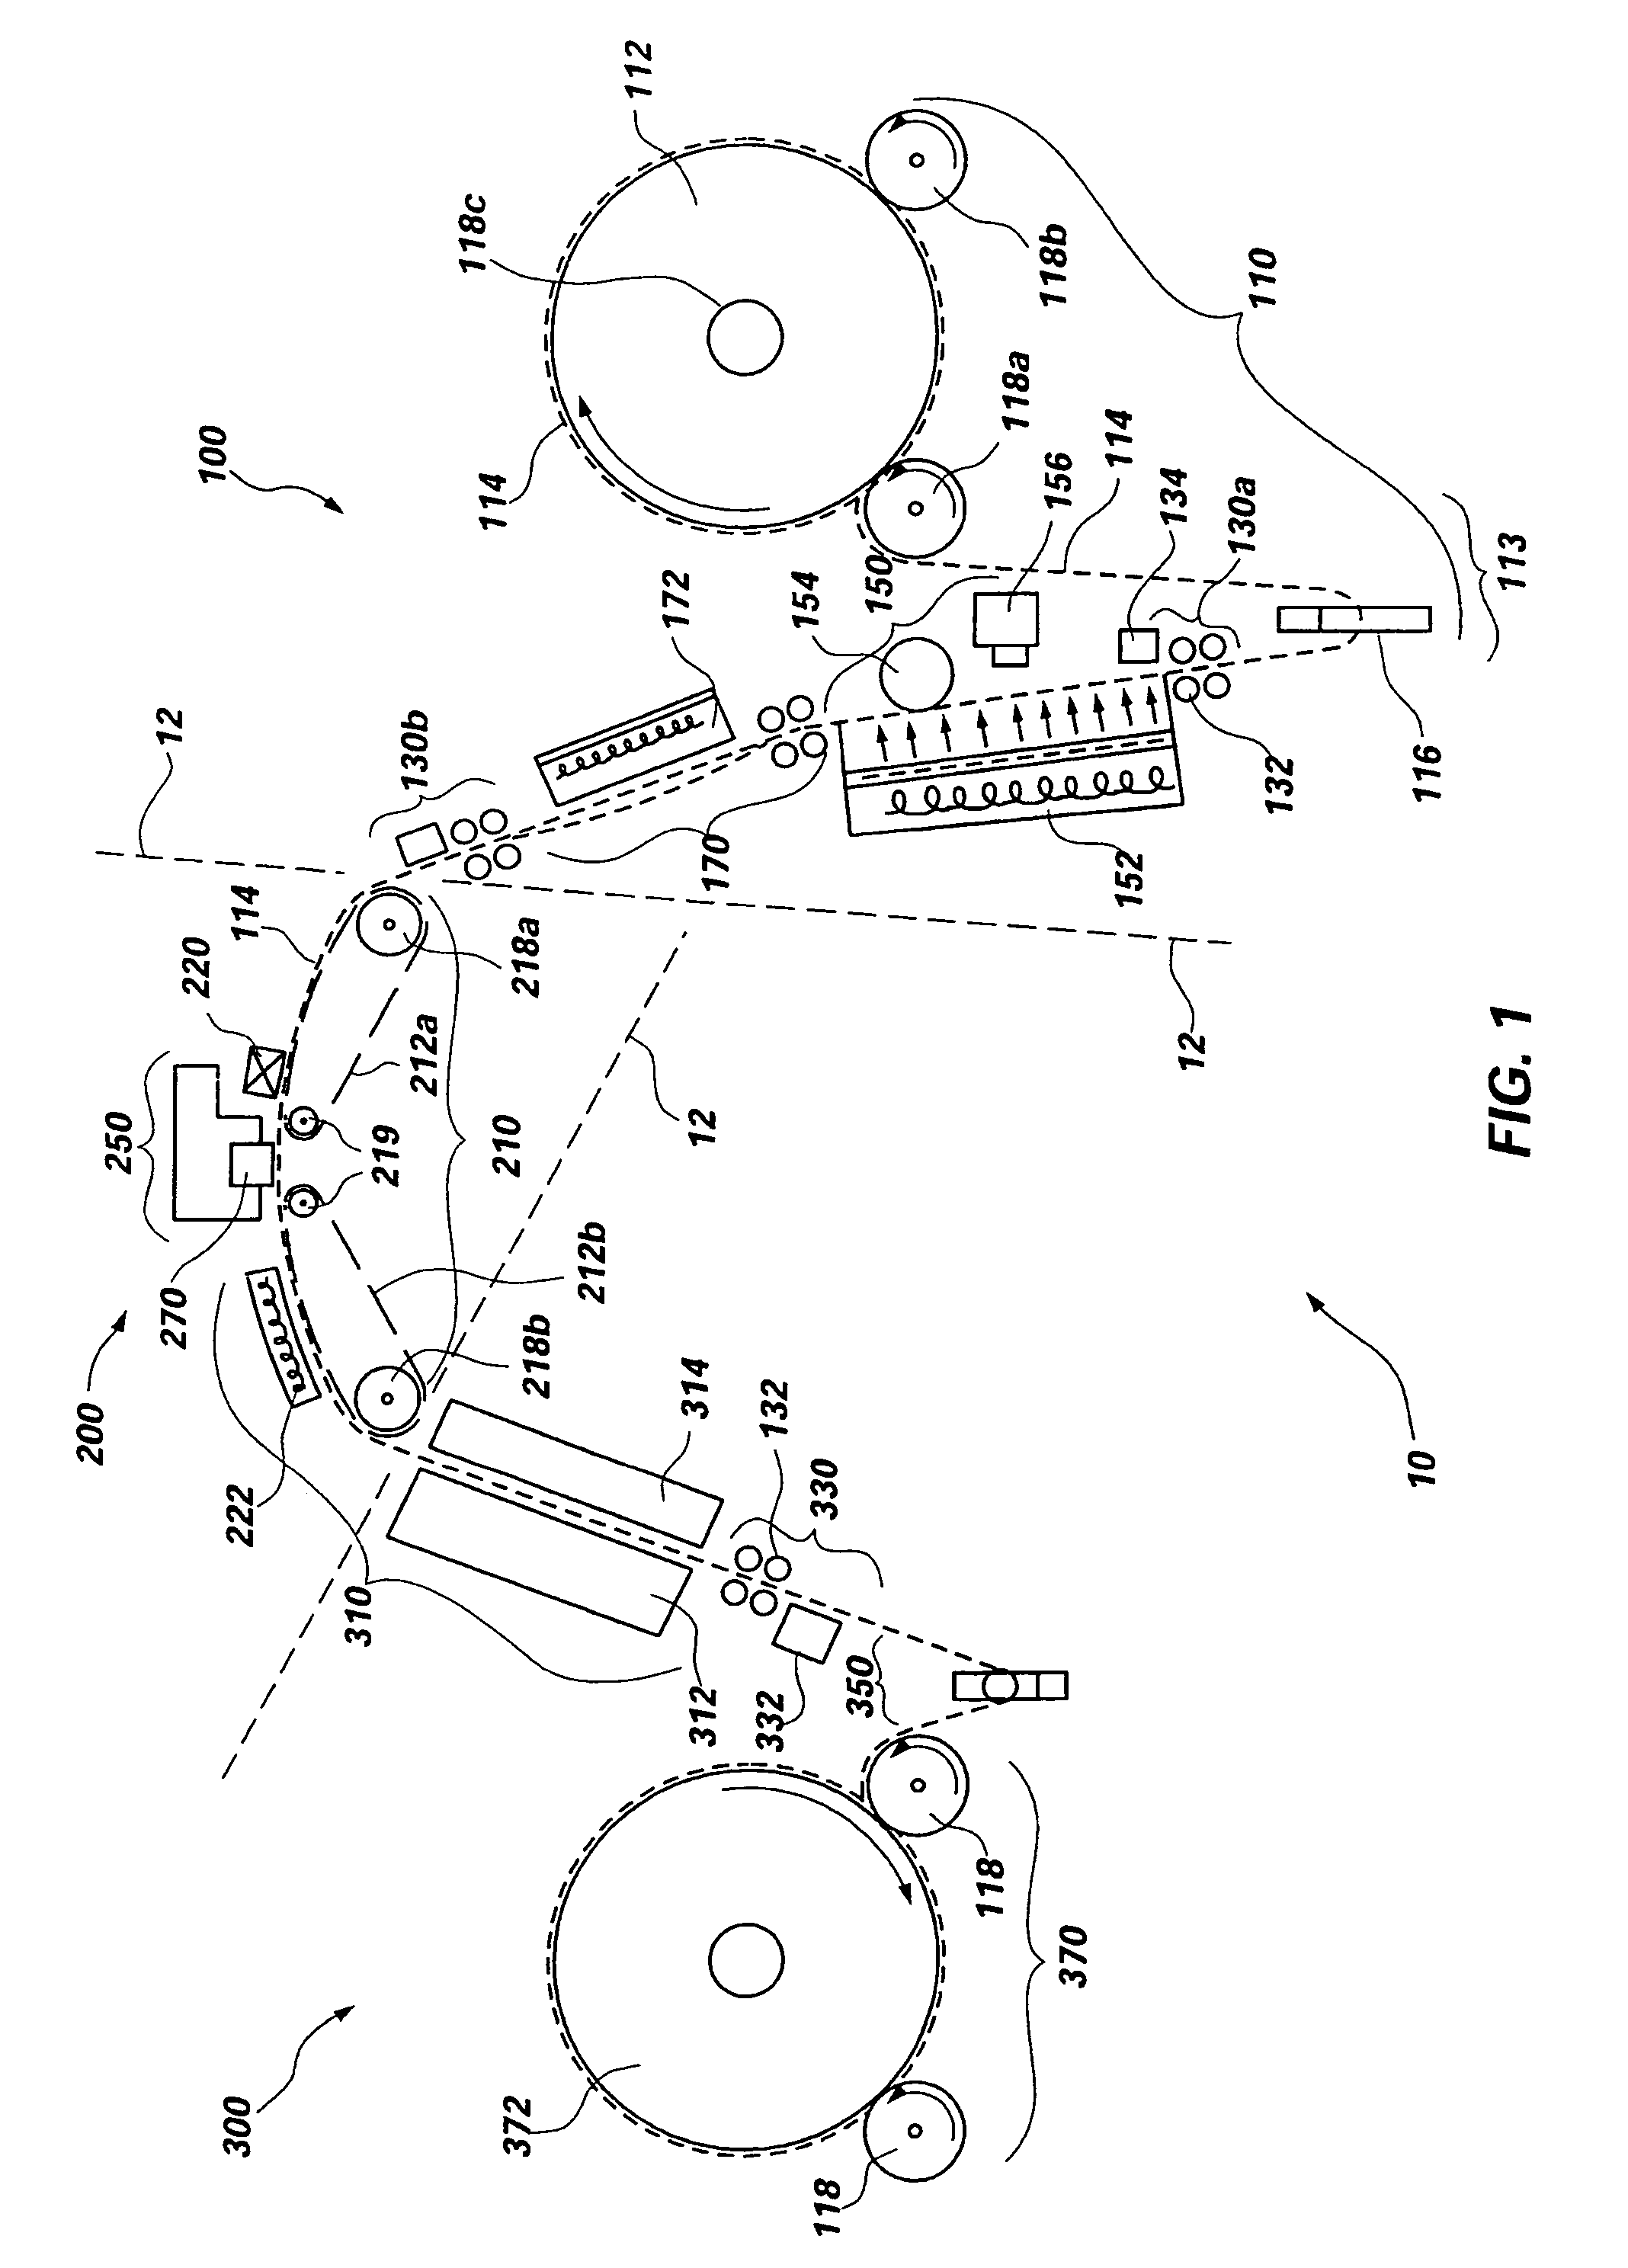 Unbacked fabric transport and condition system